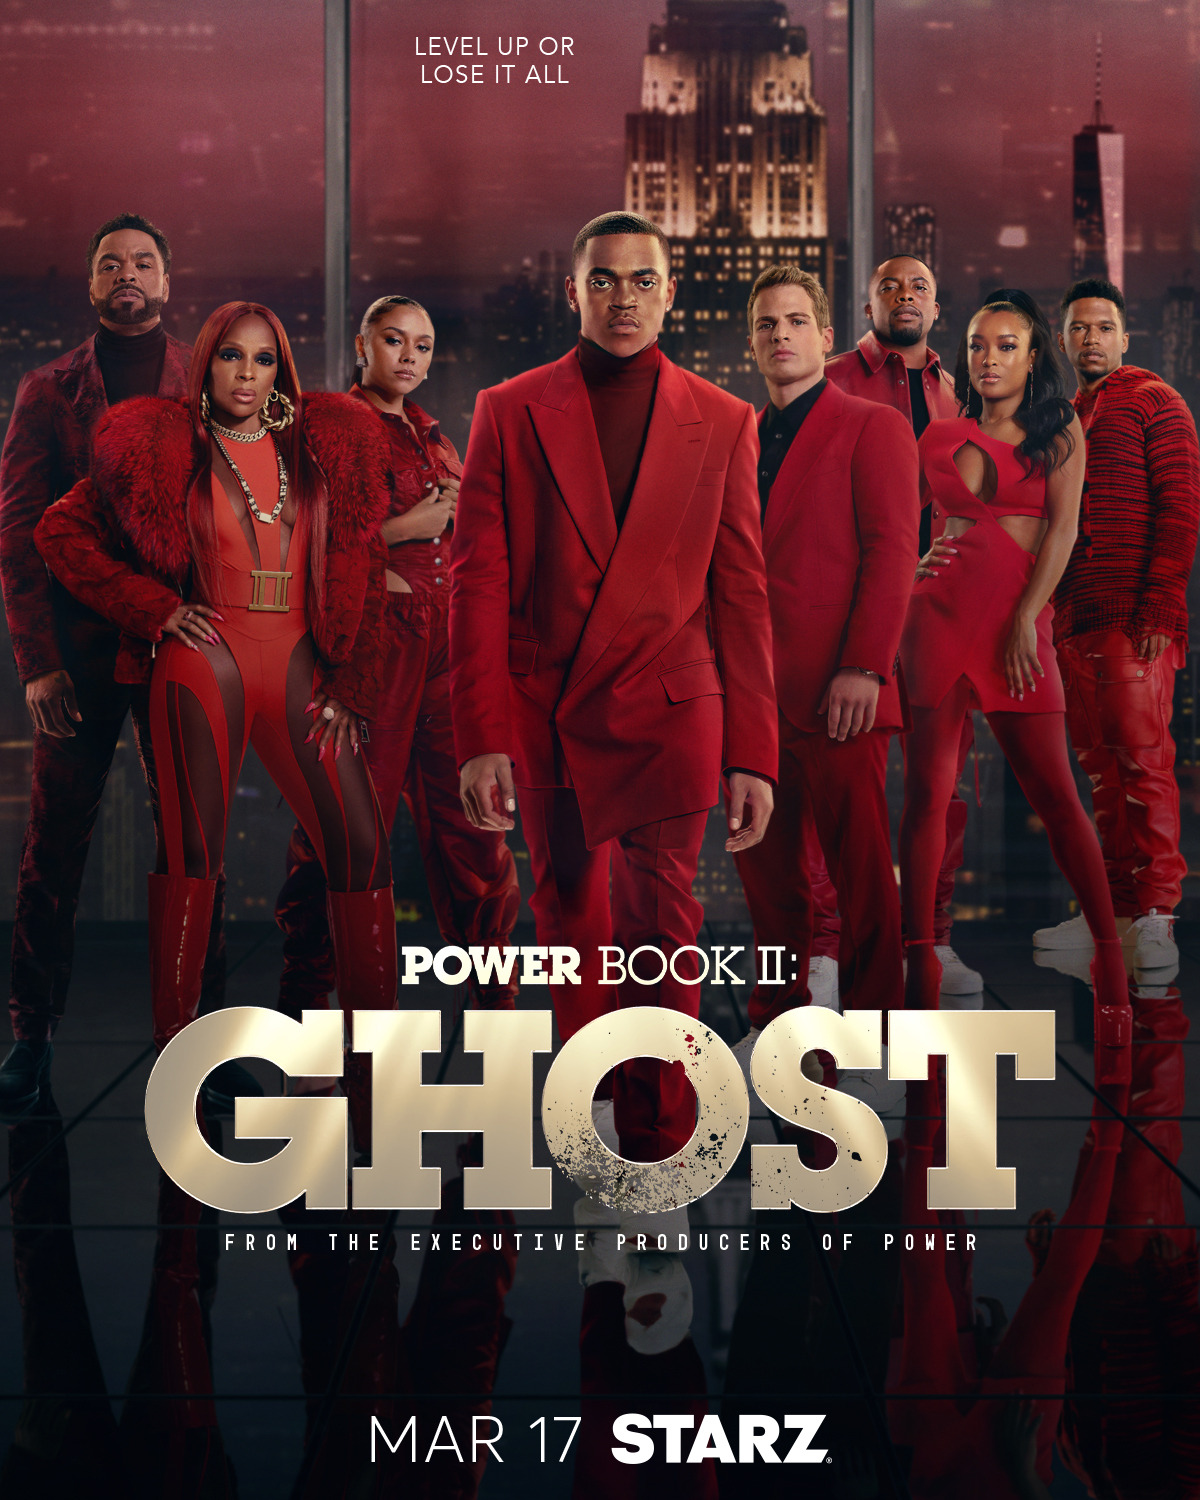 Extra Large TV Poster Image for Power Book II: Ghost (#11 of 13)